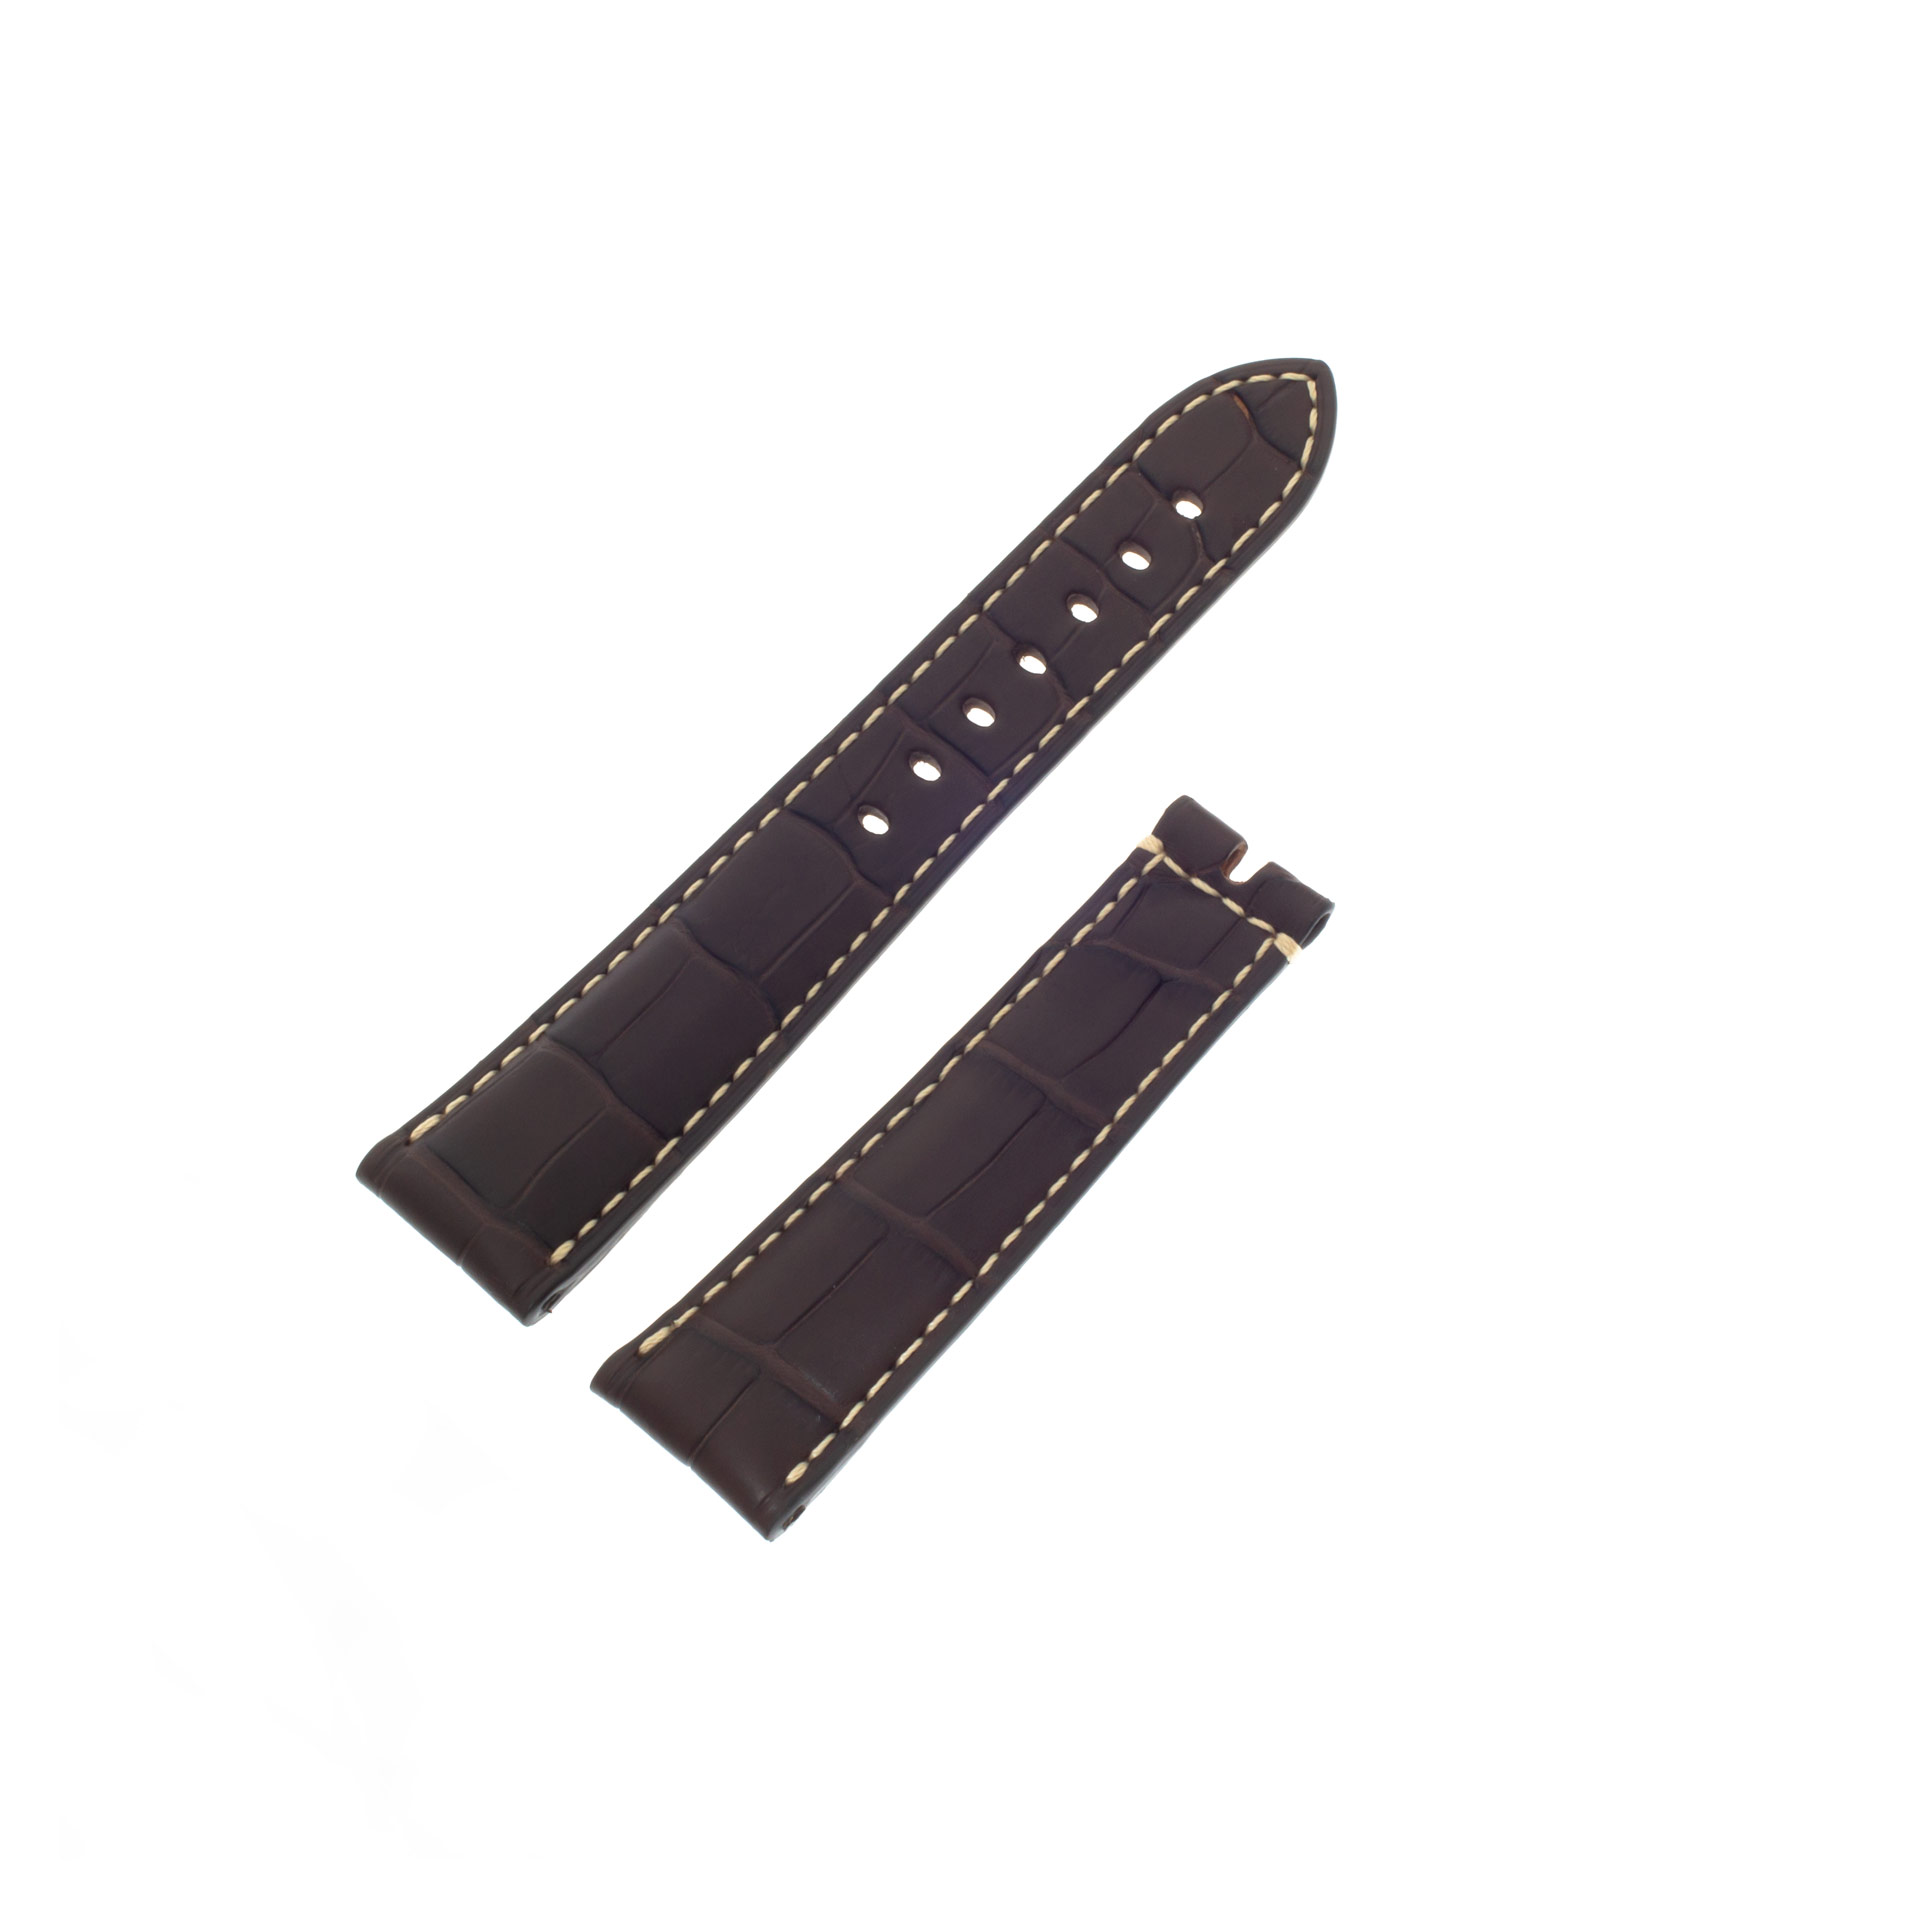 Breguet brown Alligator strap for tang buckle (22x18)